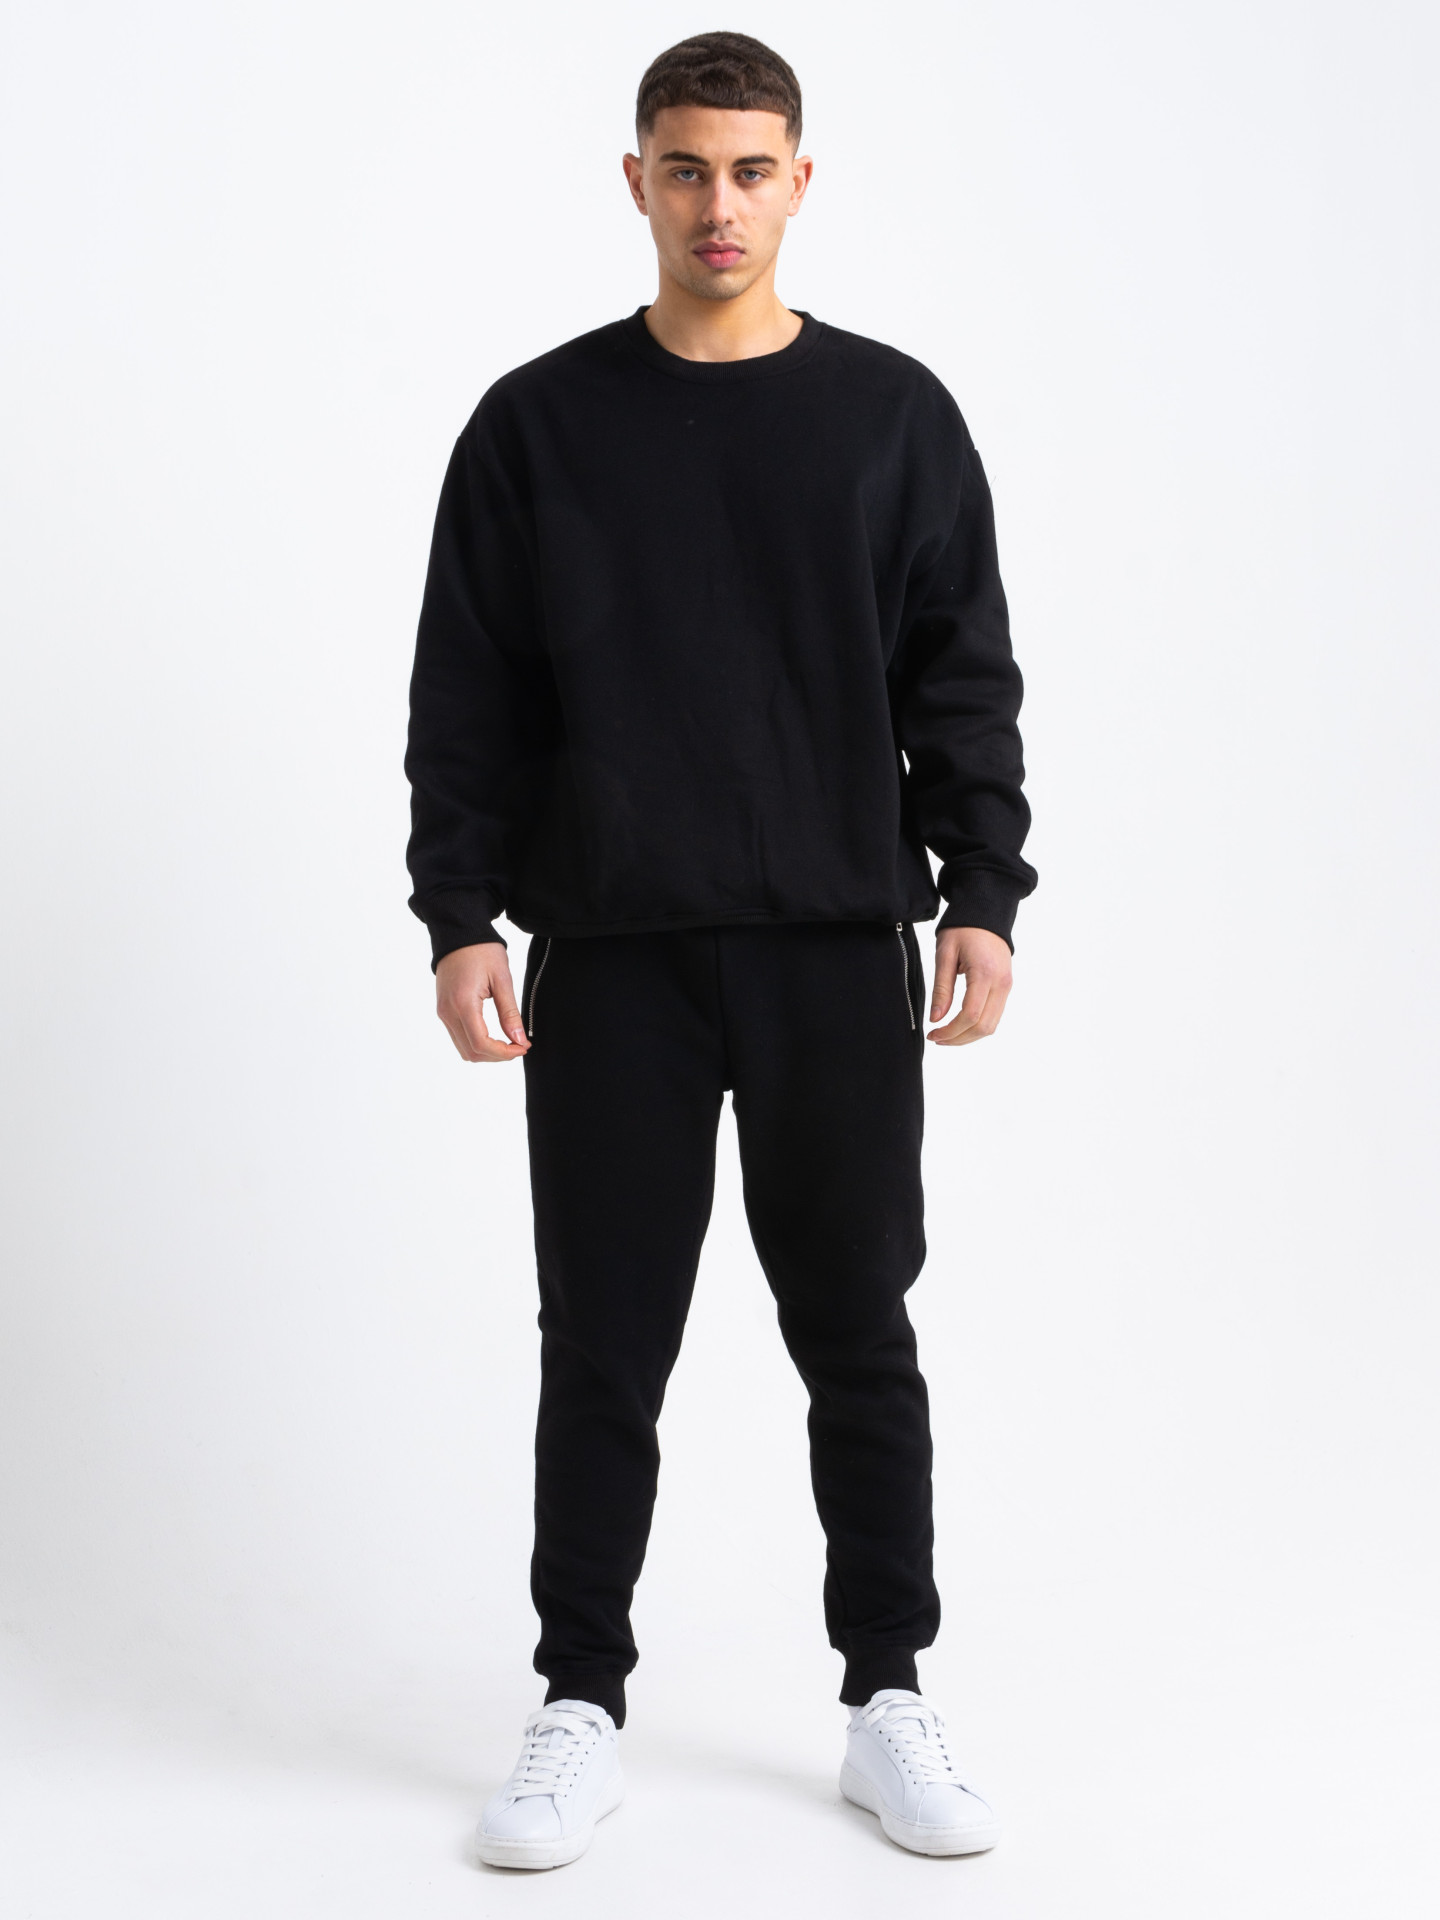 Premium Relaxed Fit Round Neck Tracksuit in Black | Men's Clothing ...